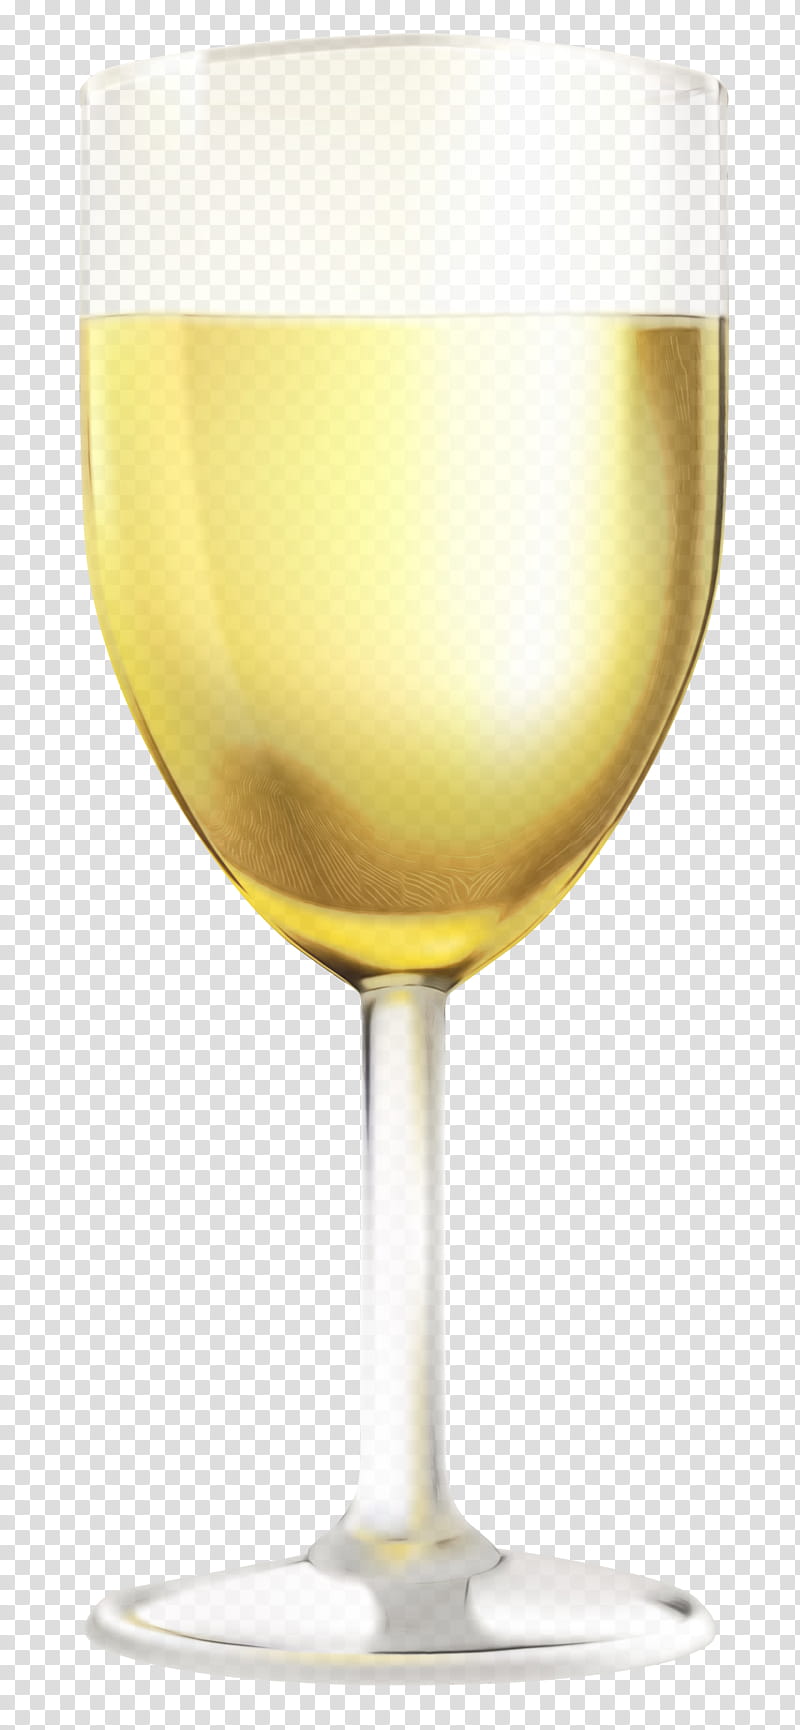 Beer, White Wine, Wine Glass, Champagne, Red Wine, Mulled Wine, Wine Cocktail, Champagne Cocktail transparent background PNG clipart